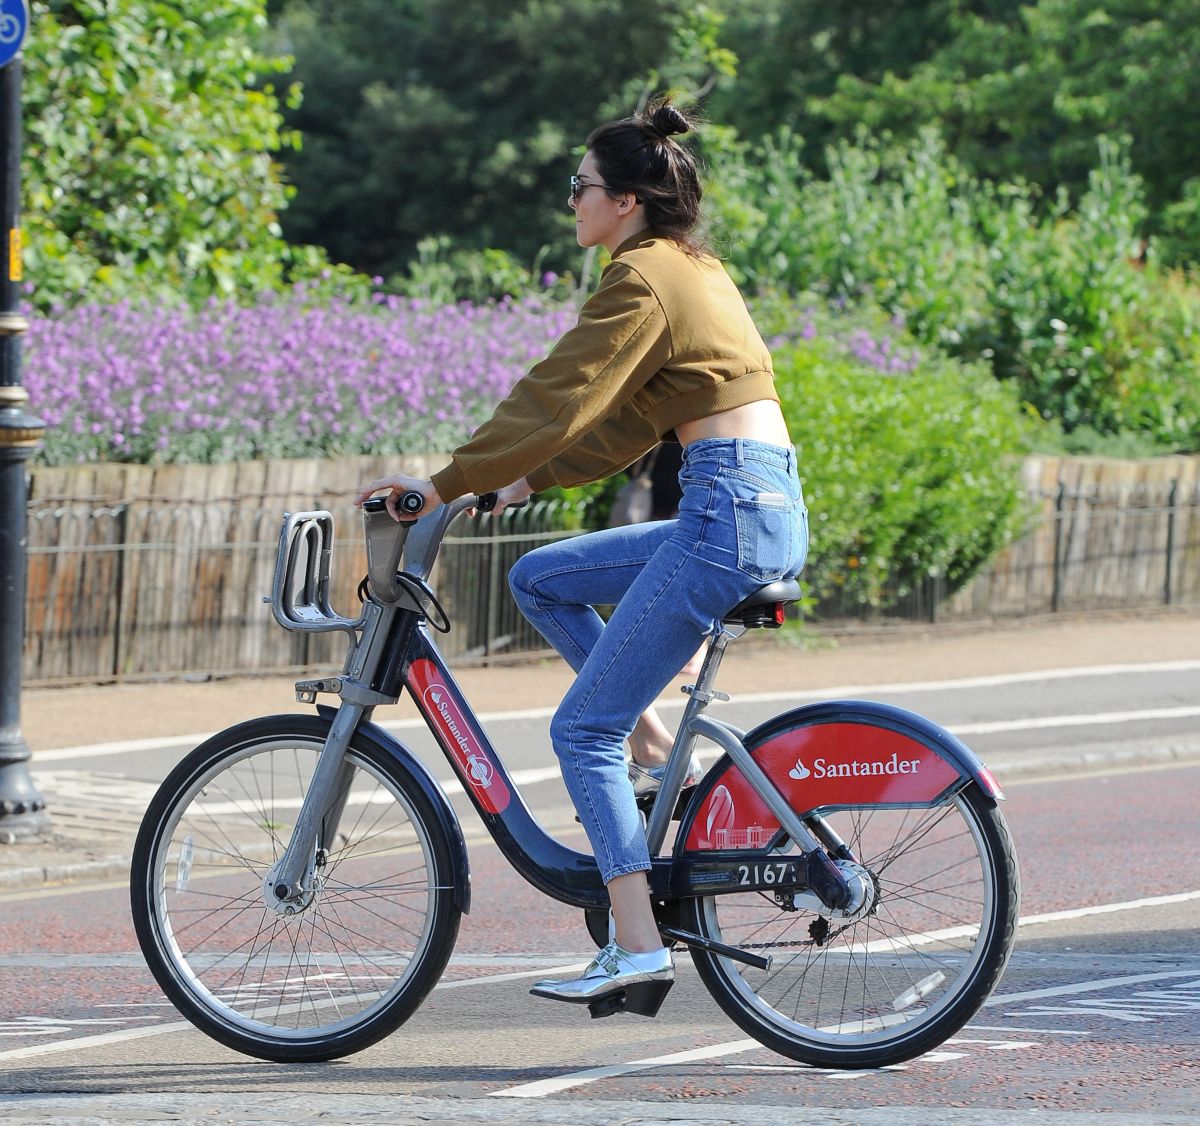 KENDALL JENNER Riding a Bike Out in London 06/29/2015 – HawtCelebs